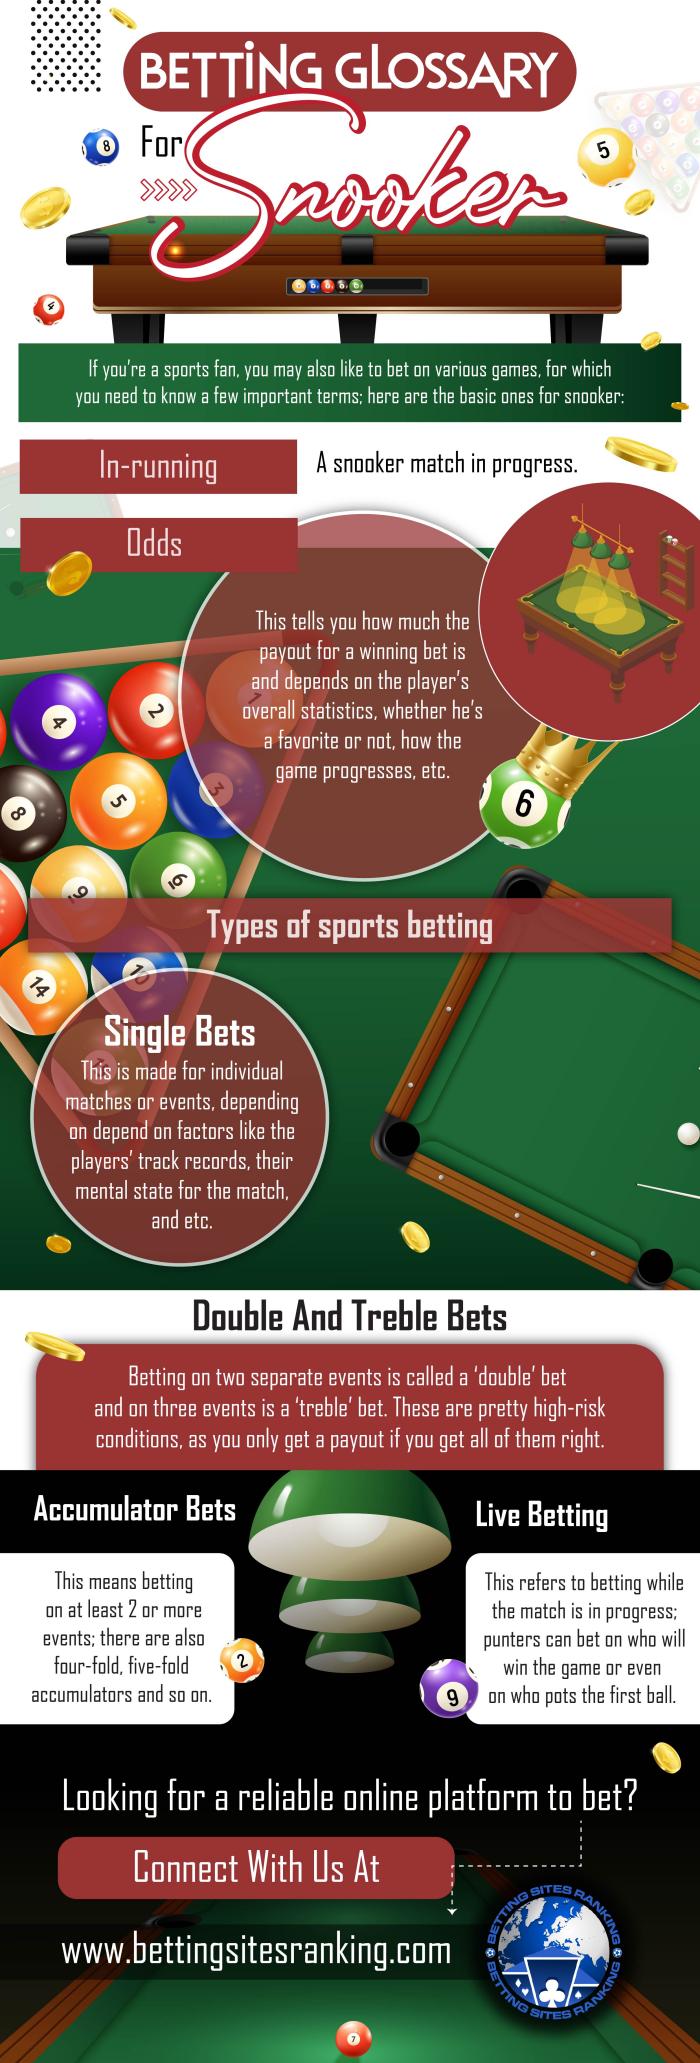 Betting-Glossary-for-Snooker